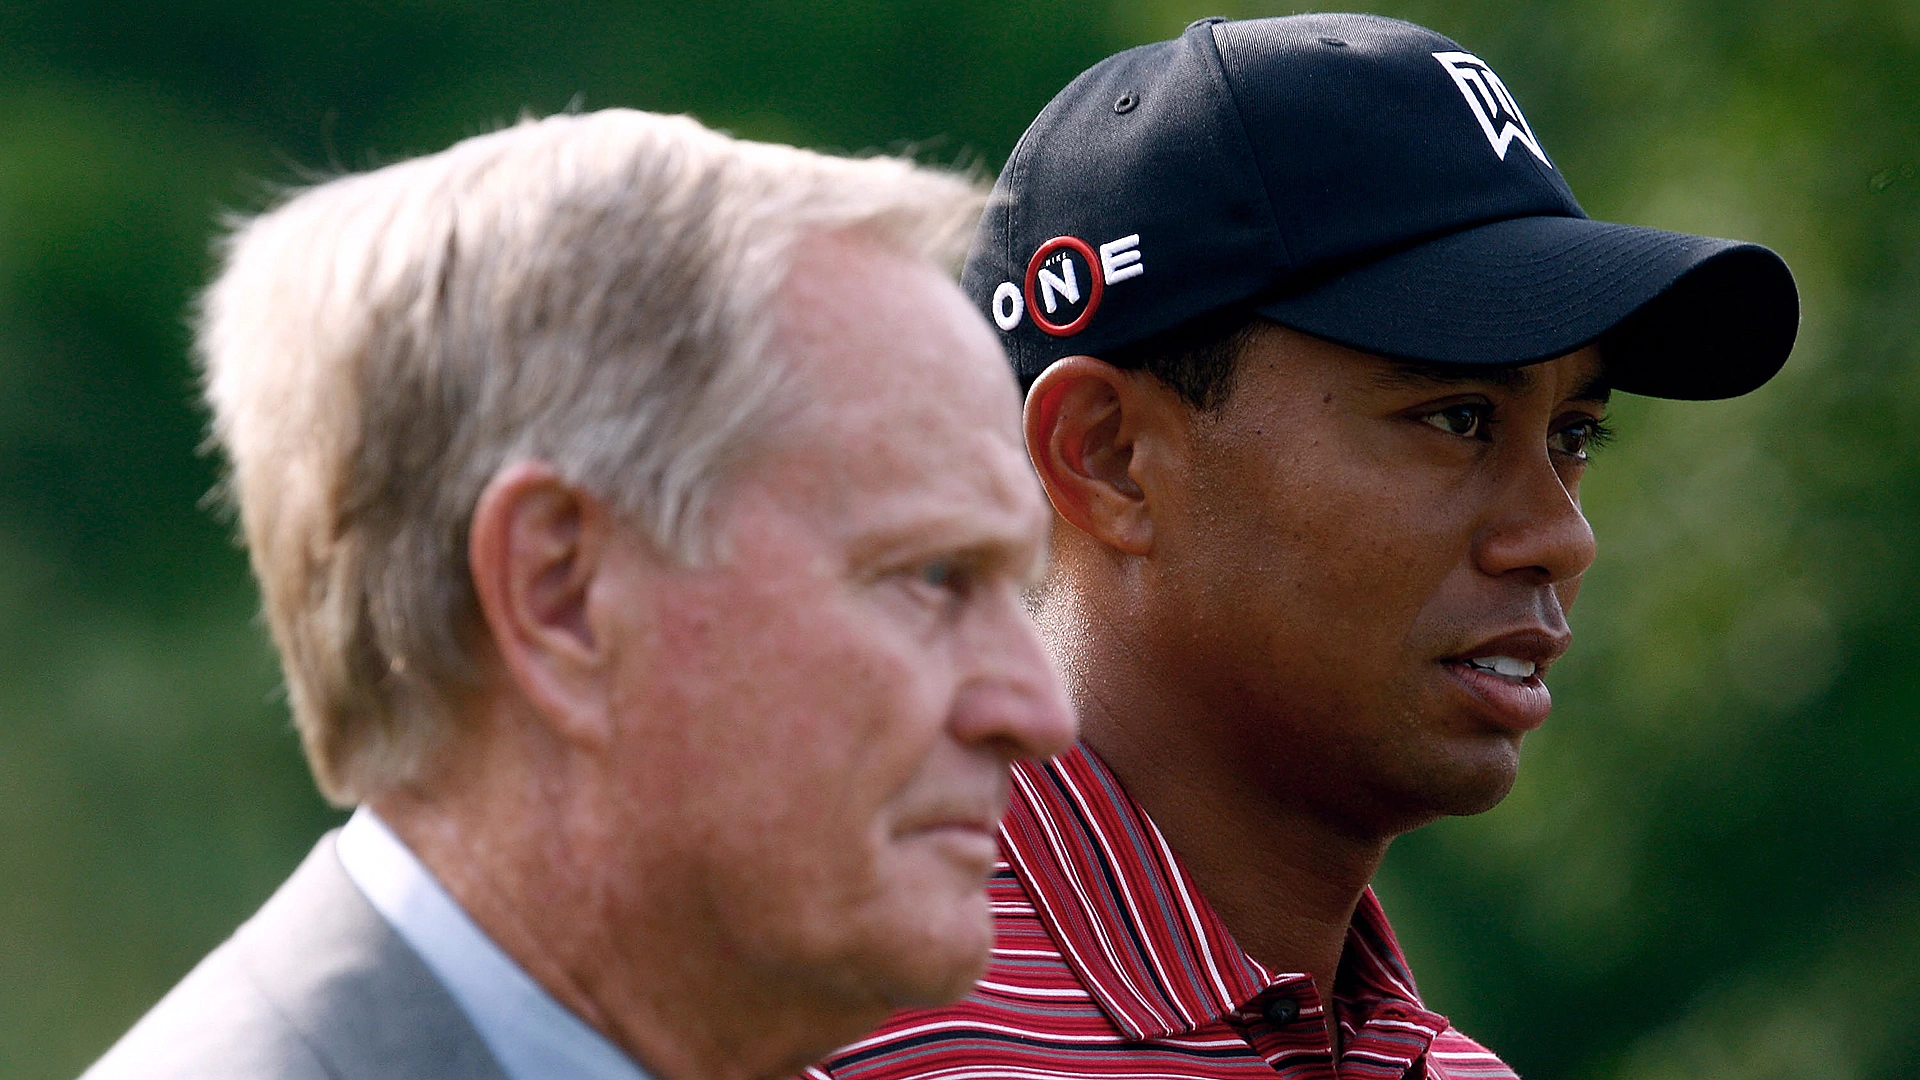 Jack supports Tiger's political comments, resurgence